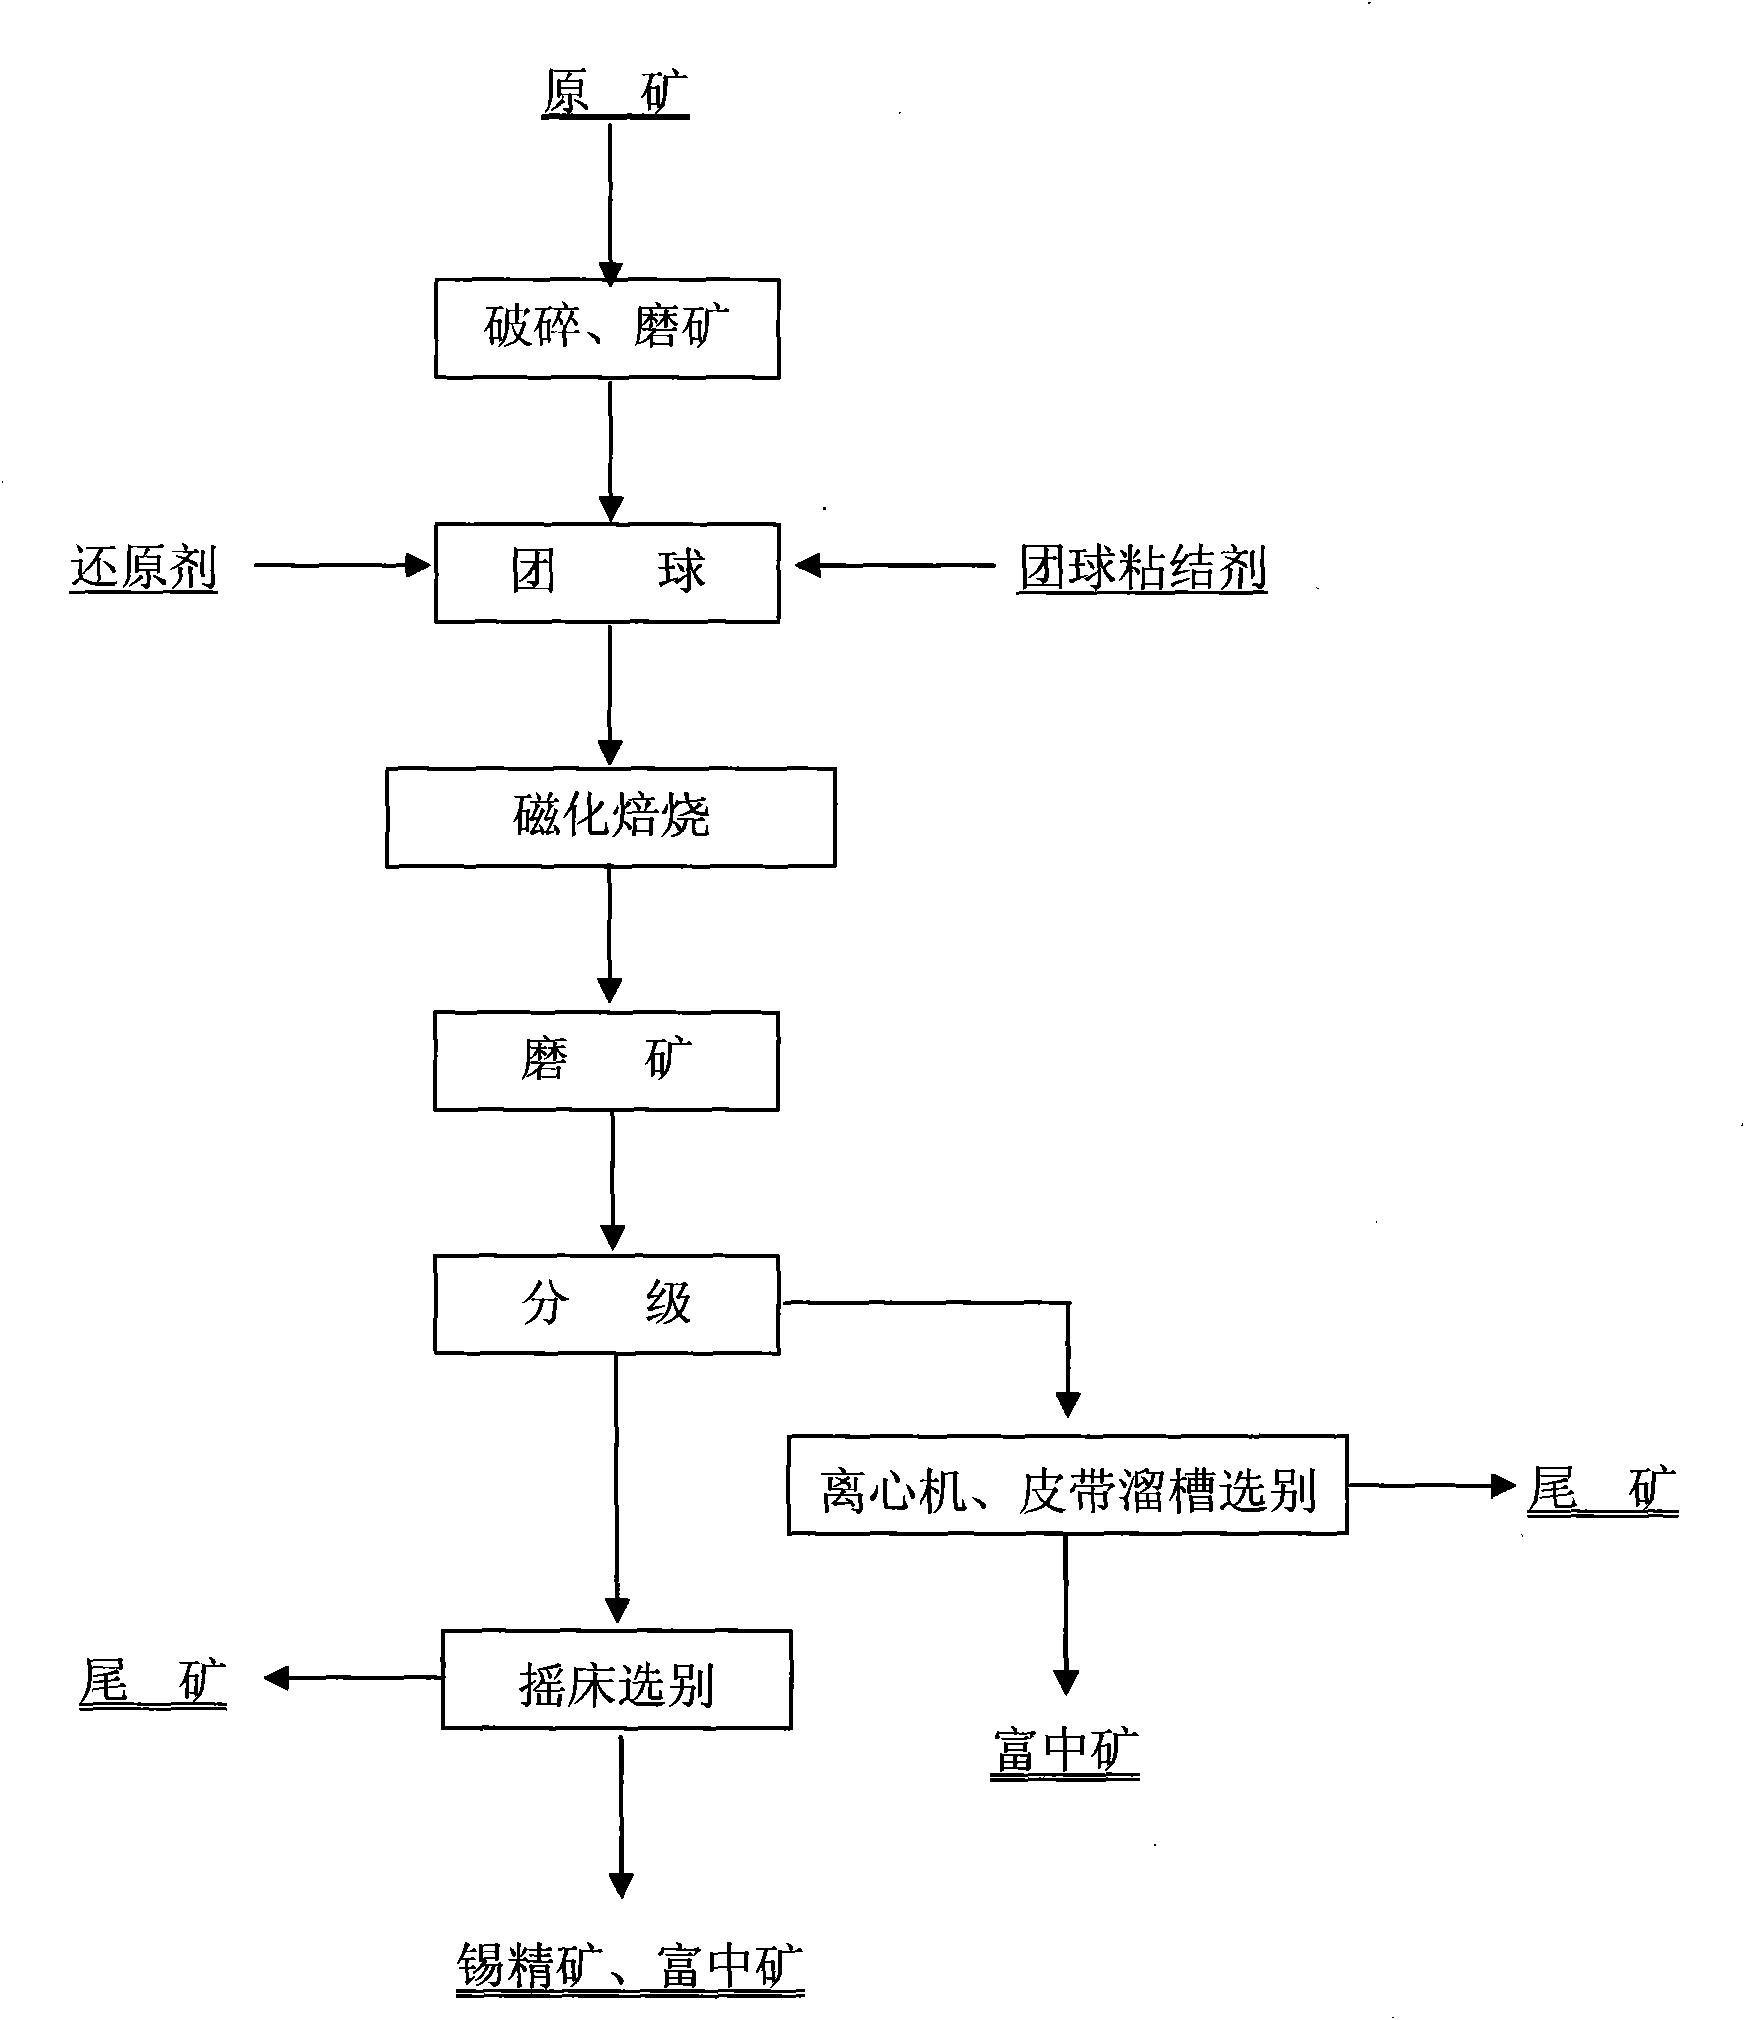 Combined process flow processing method of high-iron low-tin oxidized ore